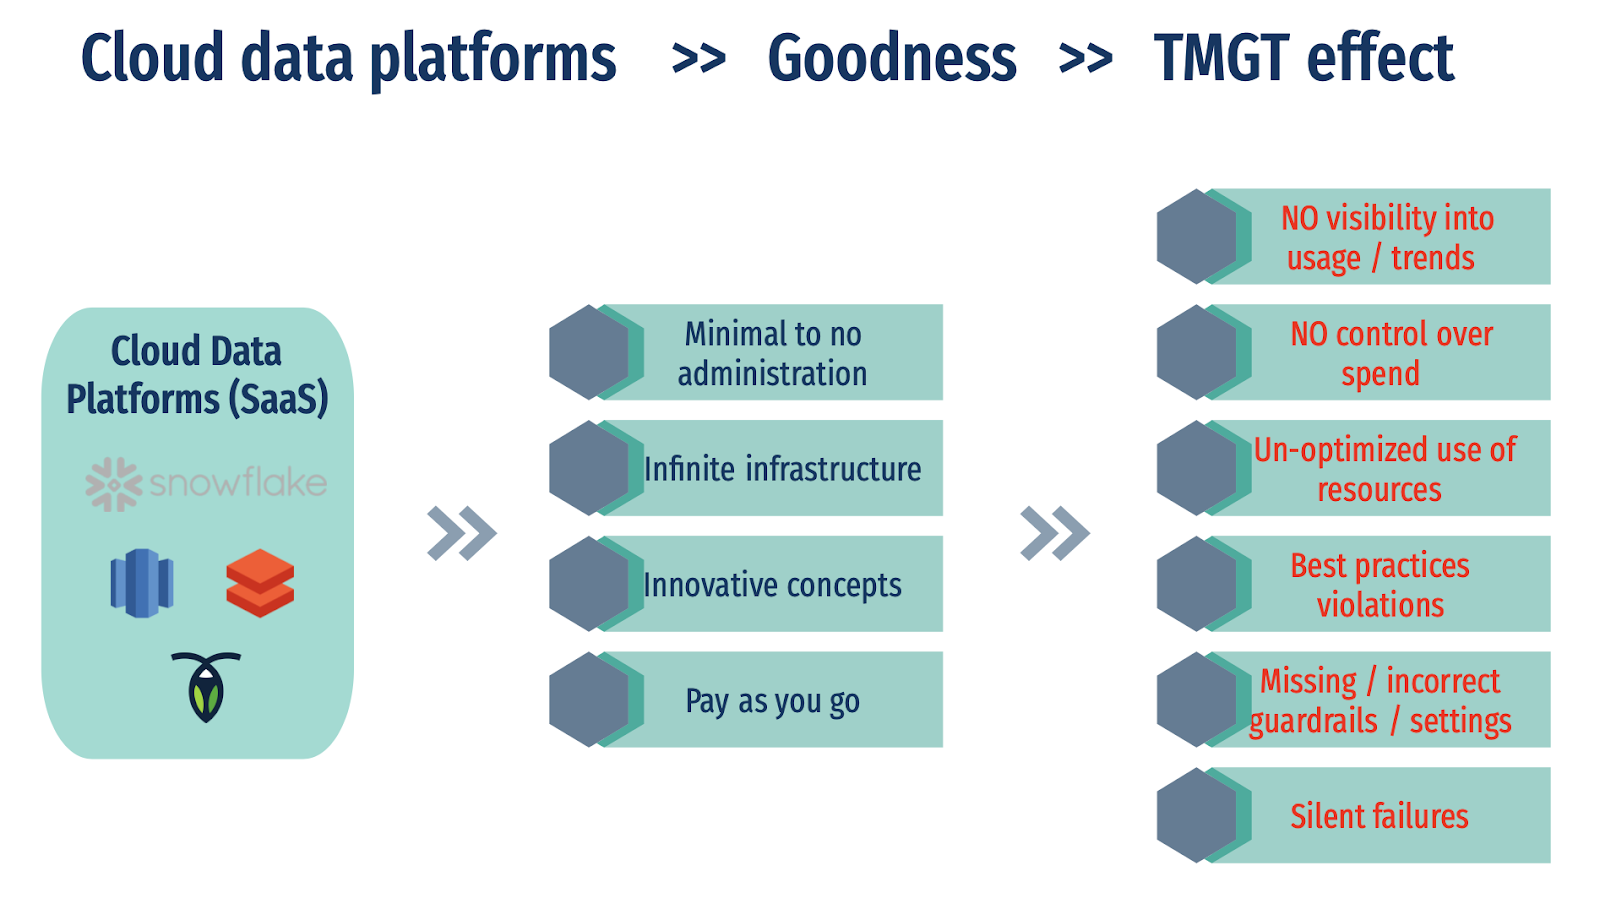 Cloud Data Platforms and the Too-Much-of-a-Good-Thing Effect